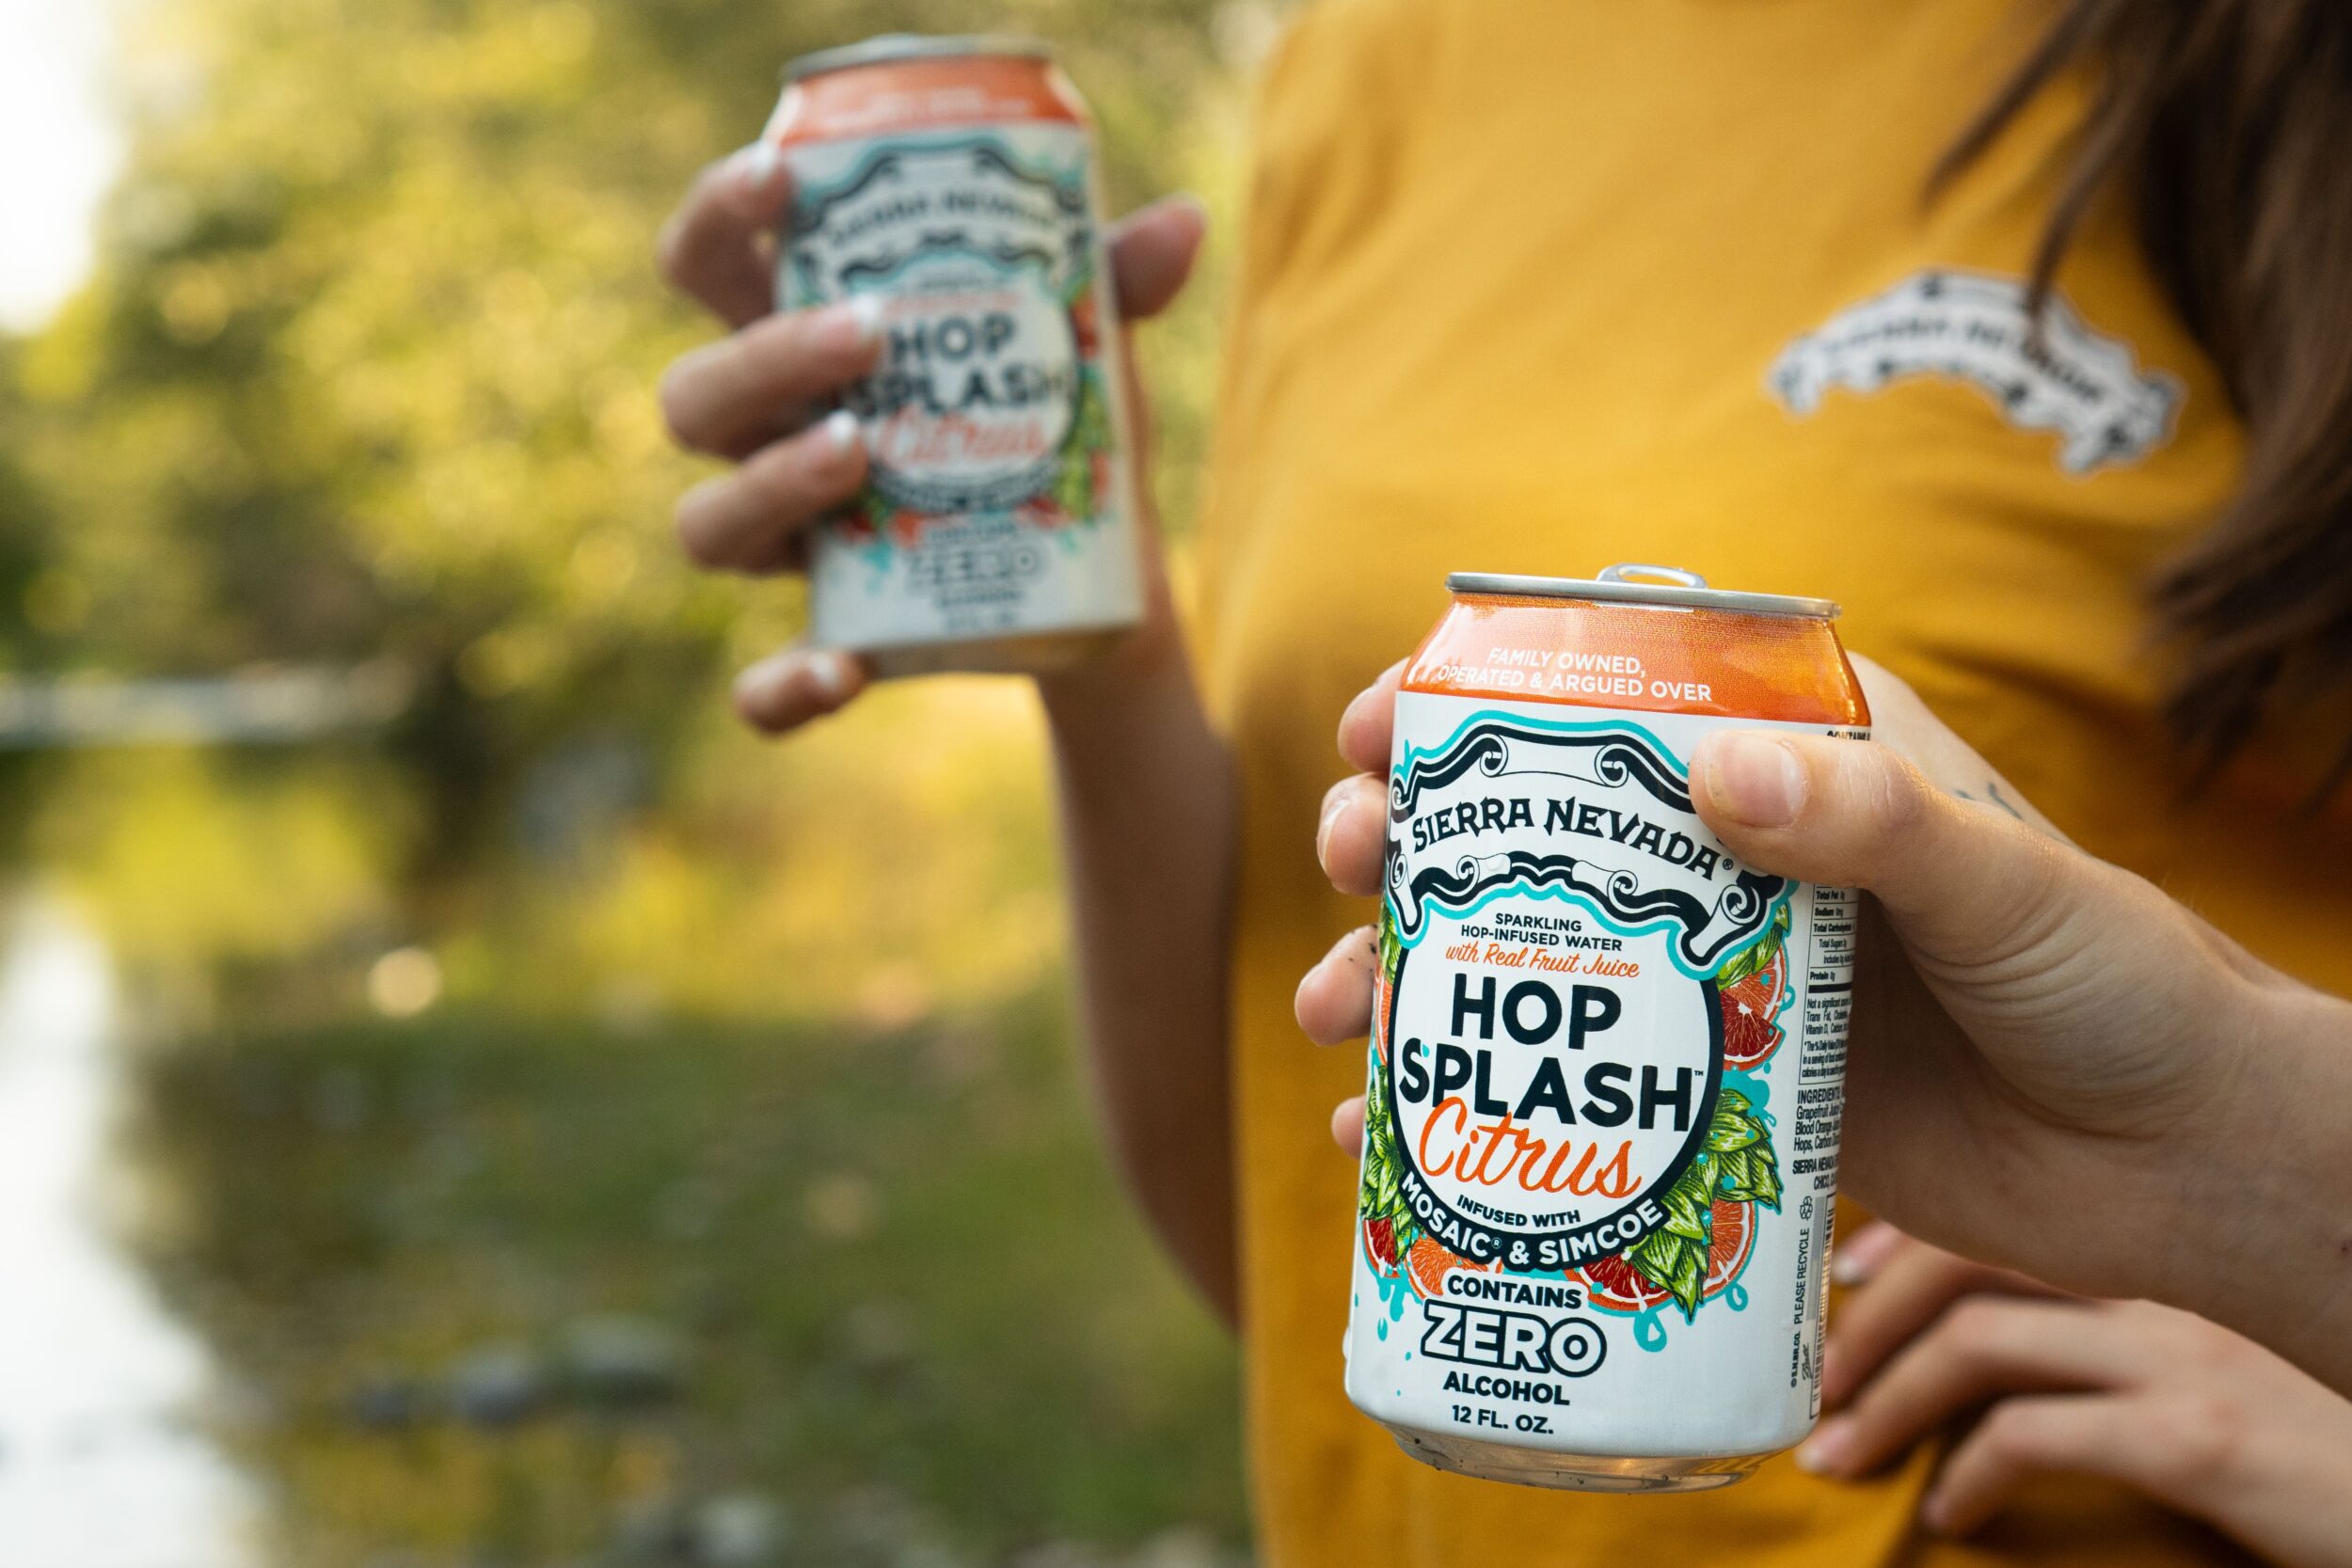 Two people, next to a creek, holding cans of Sierra Nevada Hop Splash Citrus